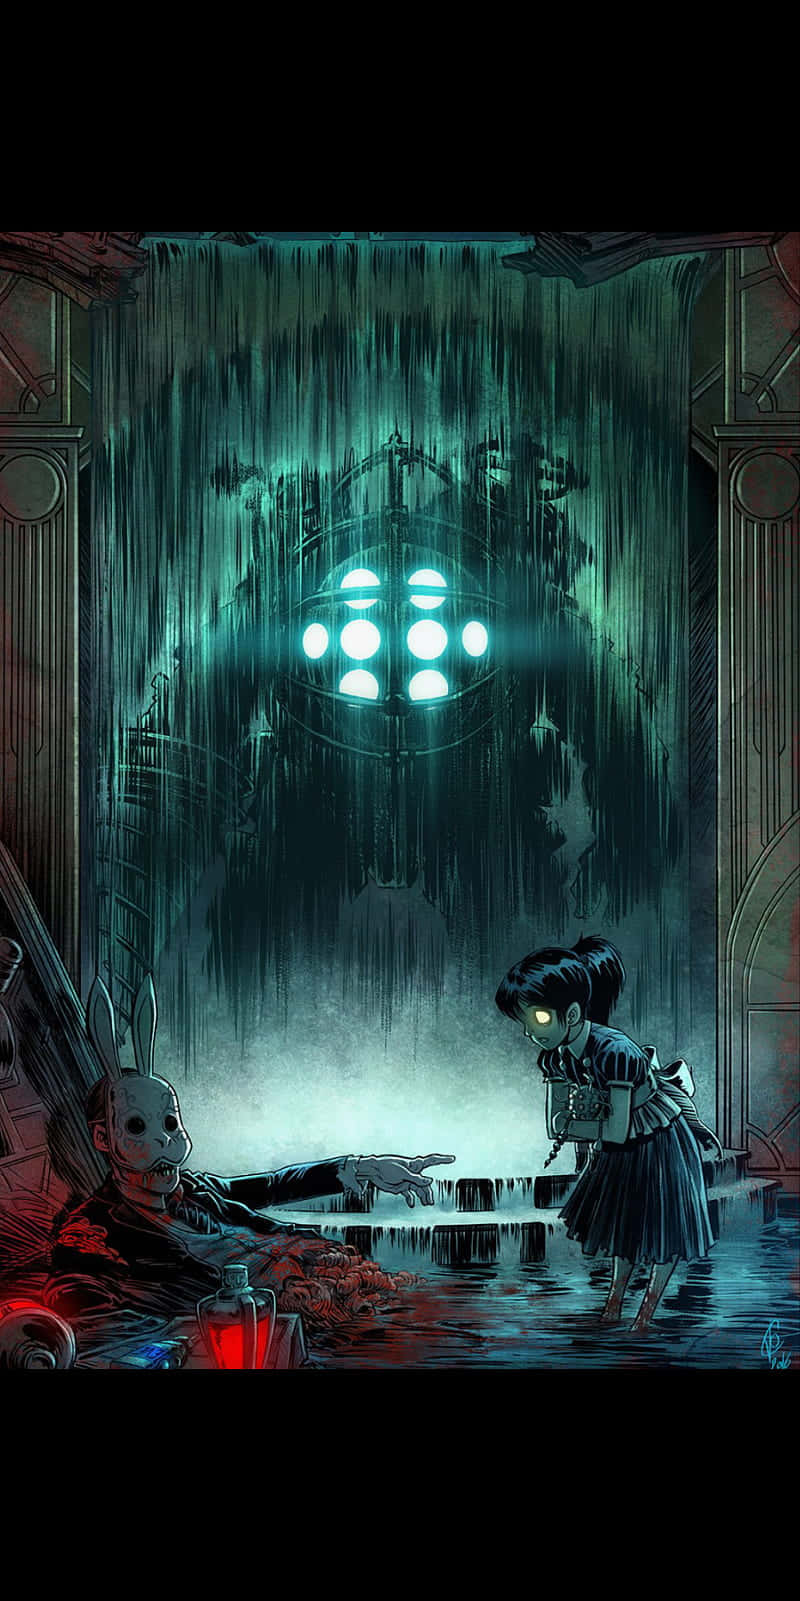 Enjoy the amazing world of Bioshock with 4K graphics on your iPhone! Wallpaper